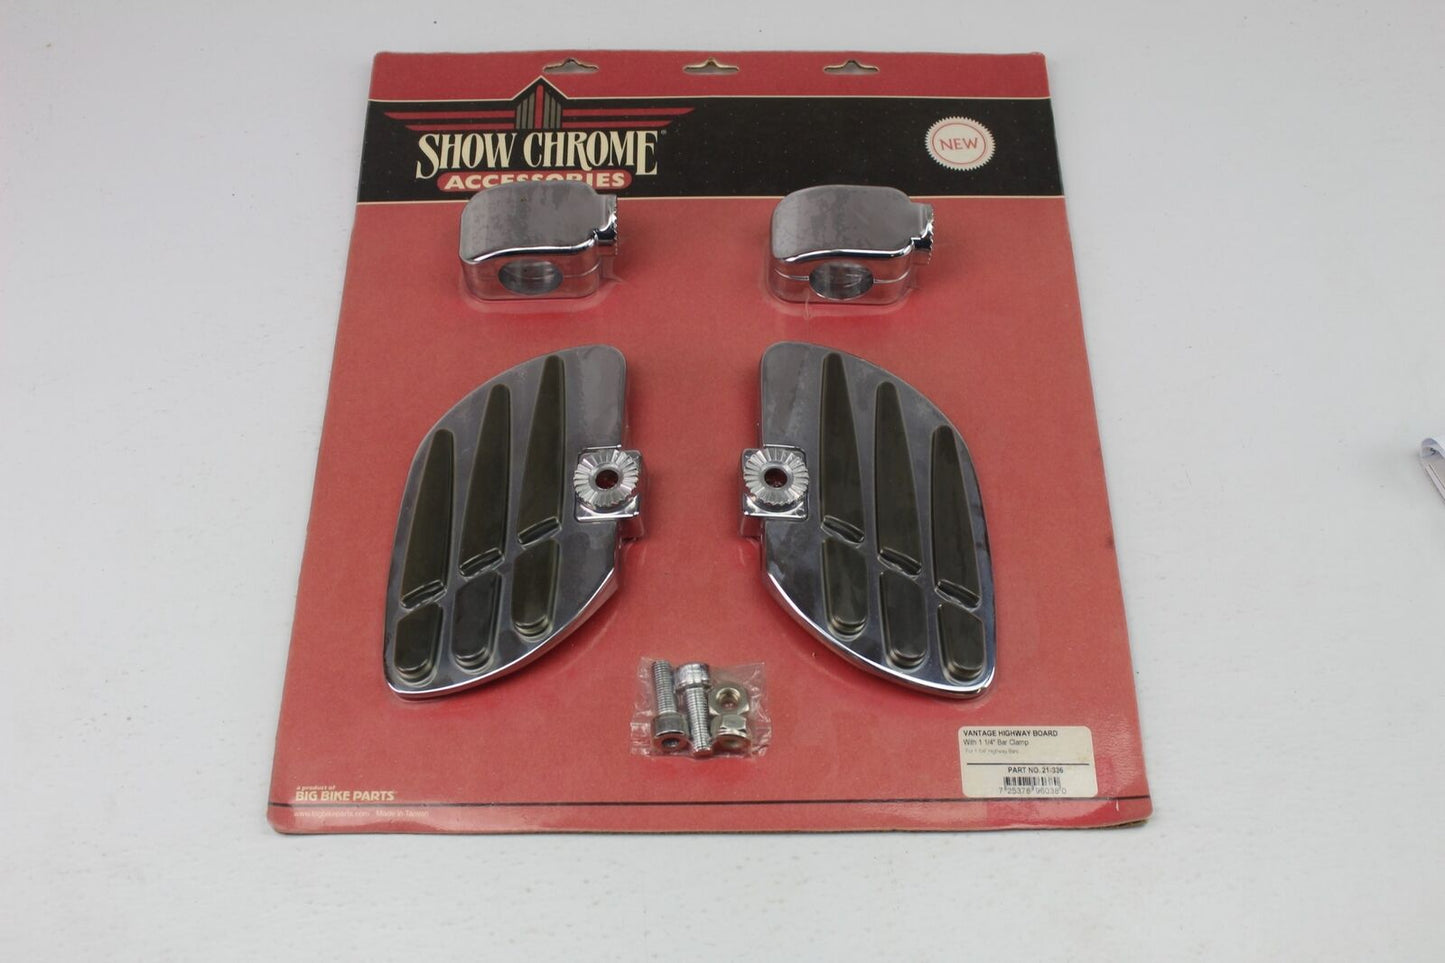 SHOW CHROME ACCESSORIES VANTAGE HIGHWAY BOARDS 1 1/4 INCH PART#21-336